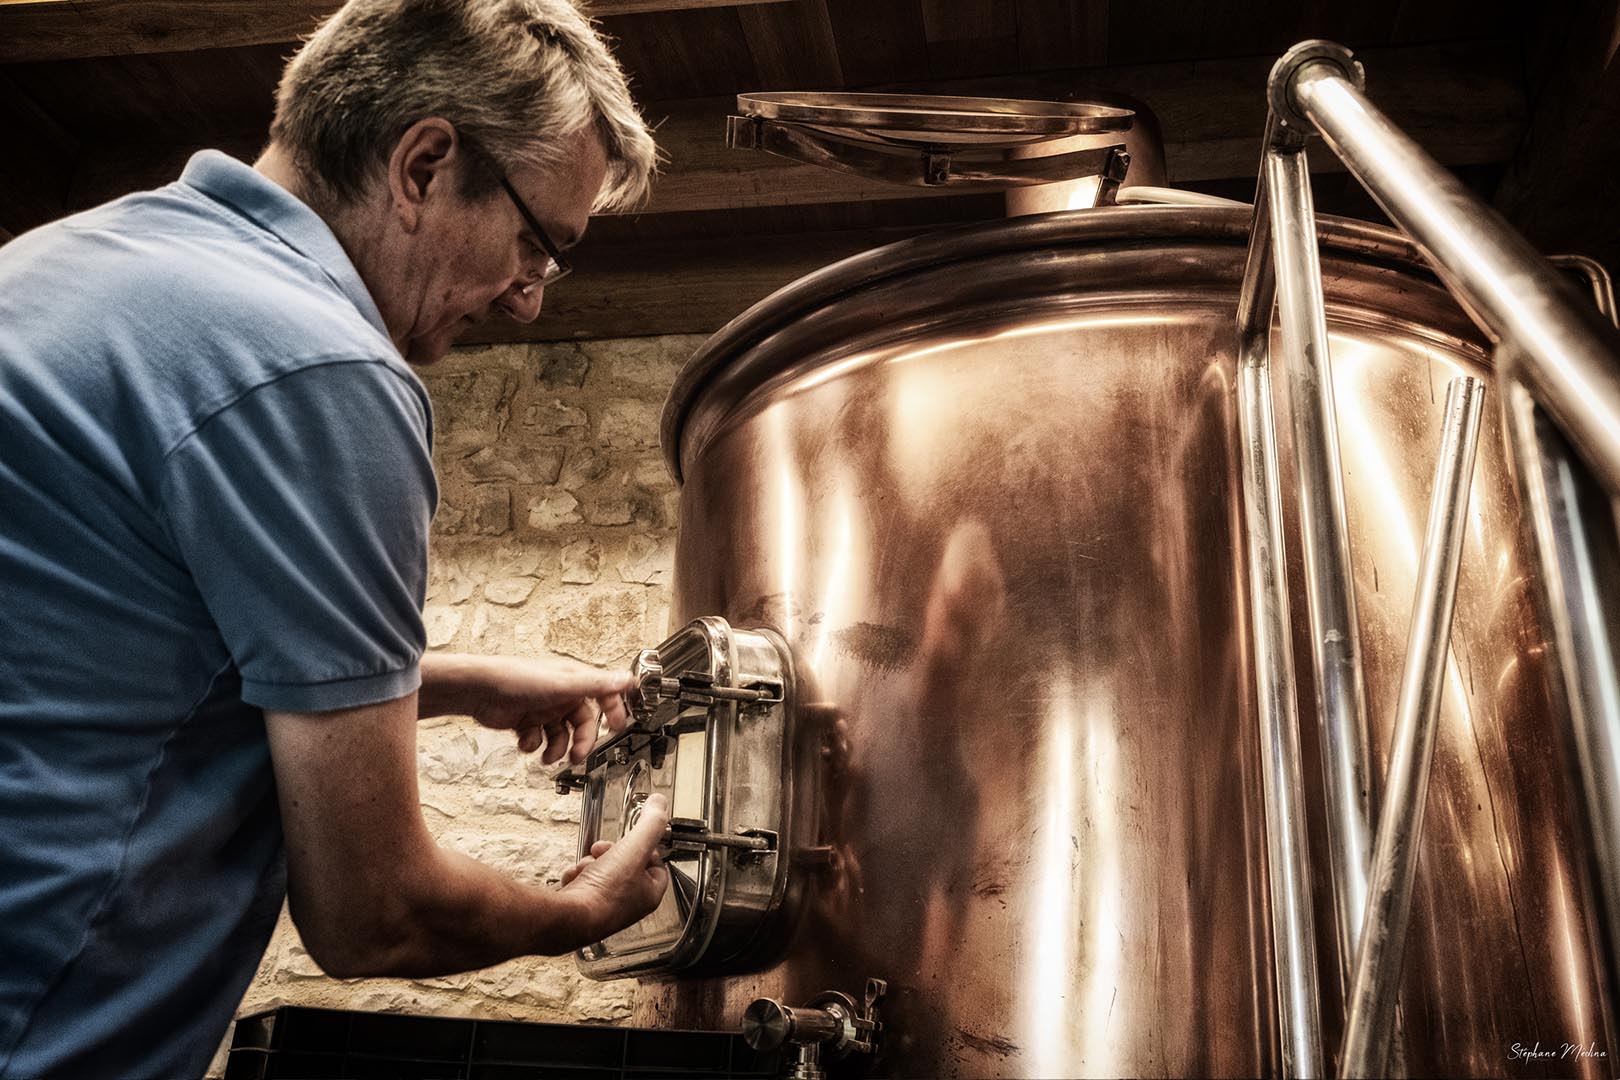 Brasserie Artisanale de Puycelsi: A brewery with a difference in one of France’s most beautiful villages, Discover Southern Europe magazine